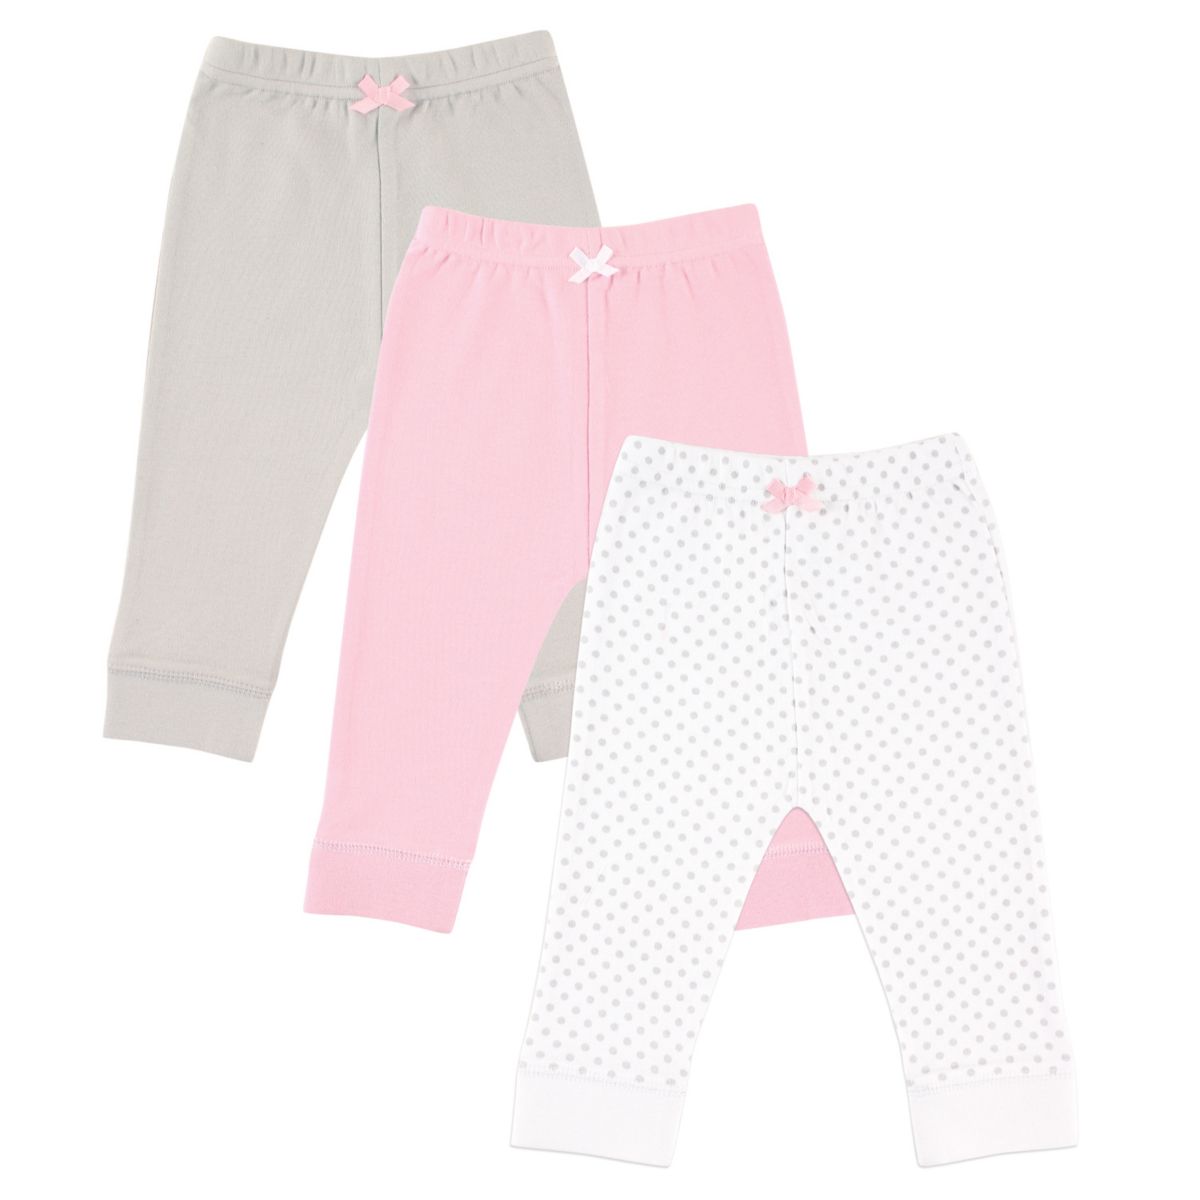 Luvable Friends Baby and Toddler Girl Cotton Pants 3pk, Gray Dot Luvable Friends